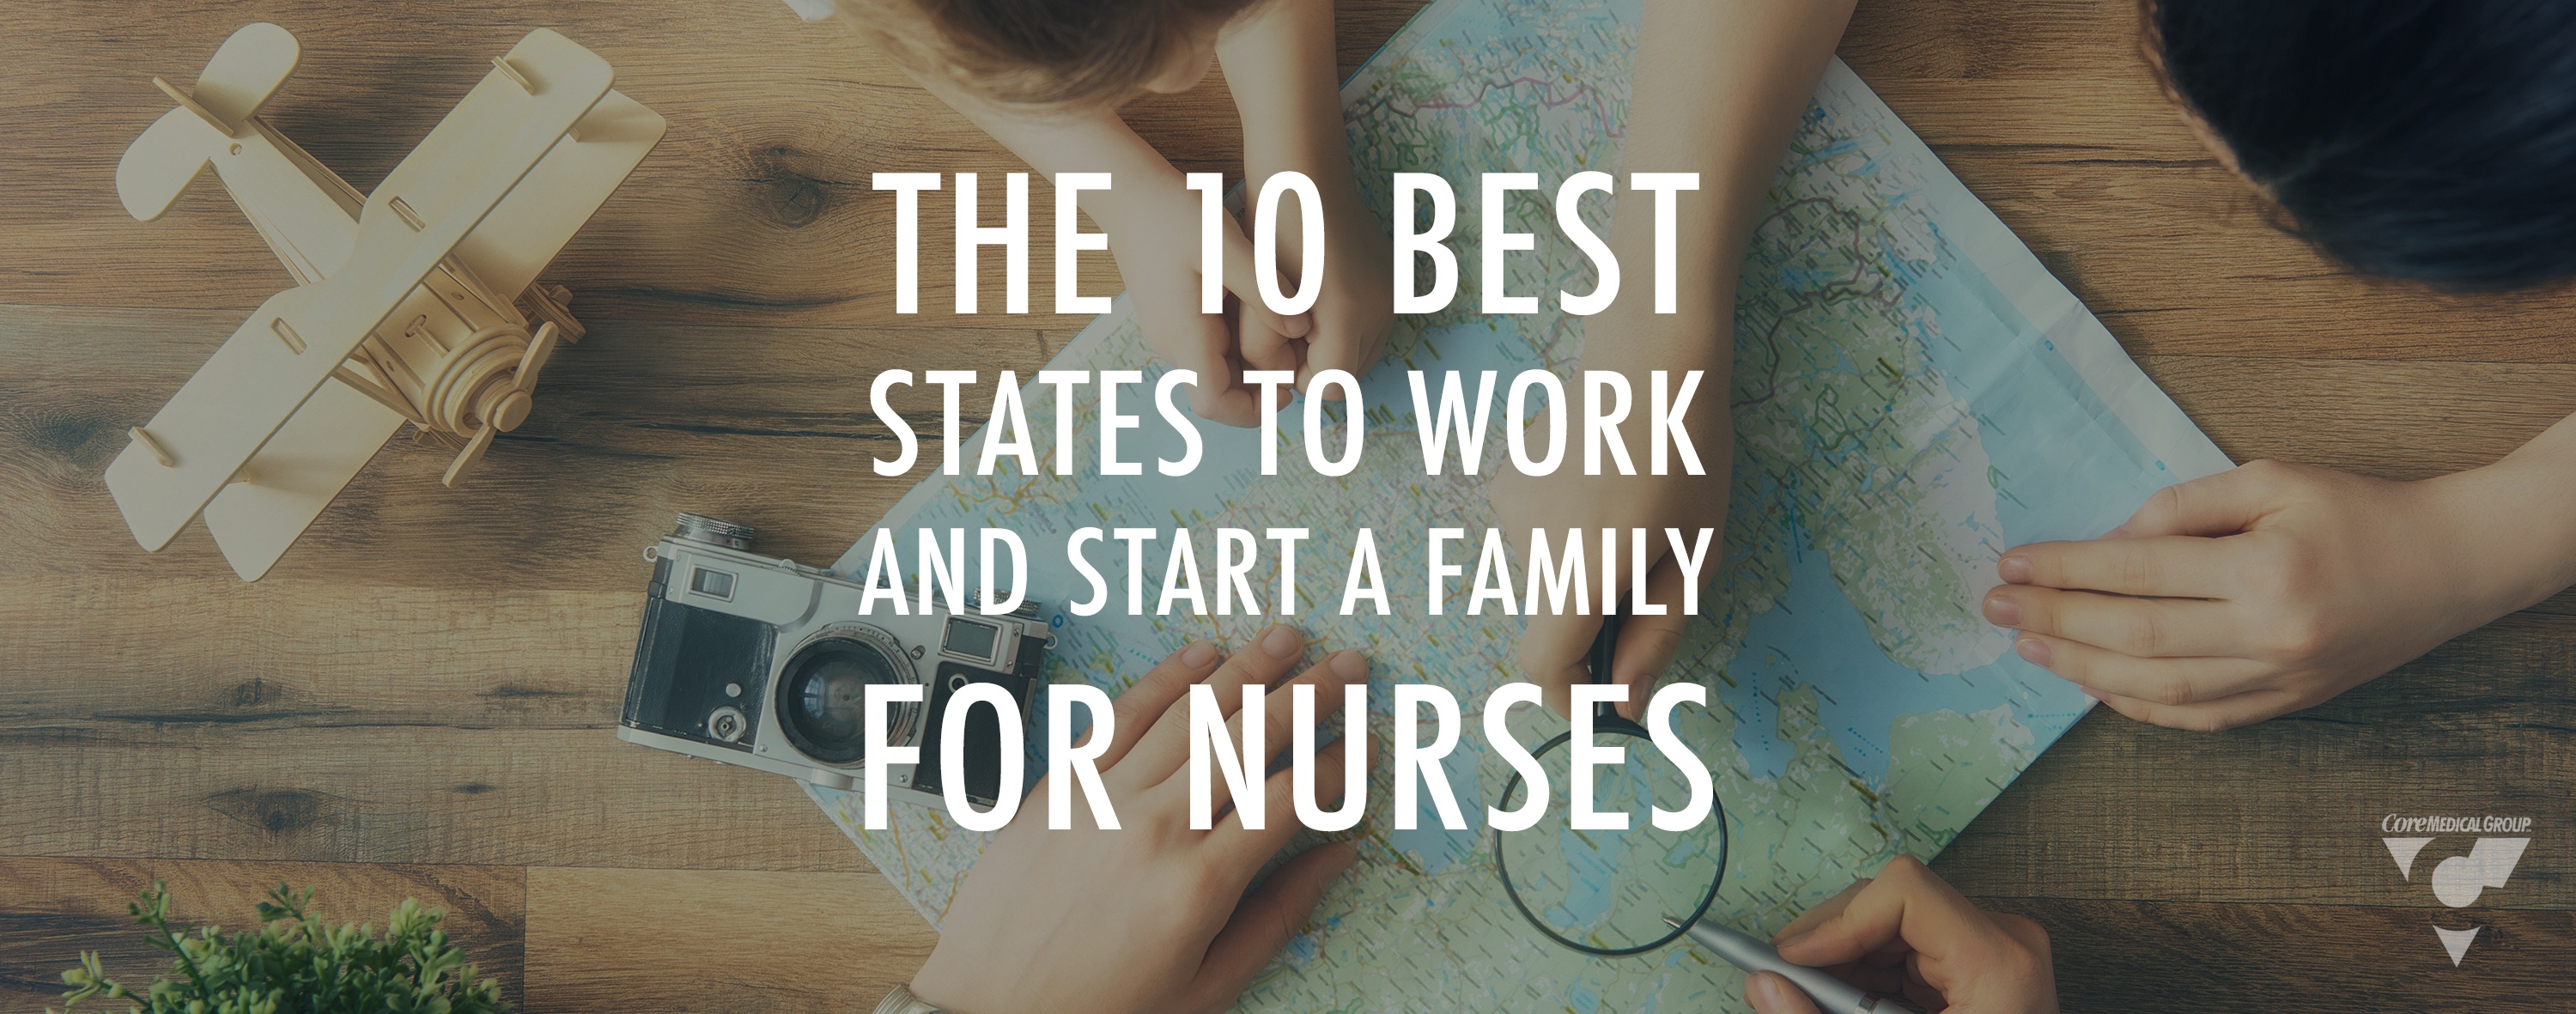 travel nurses best place to work and start a family 